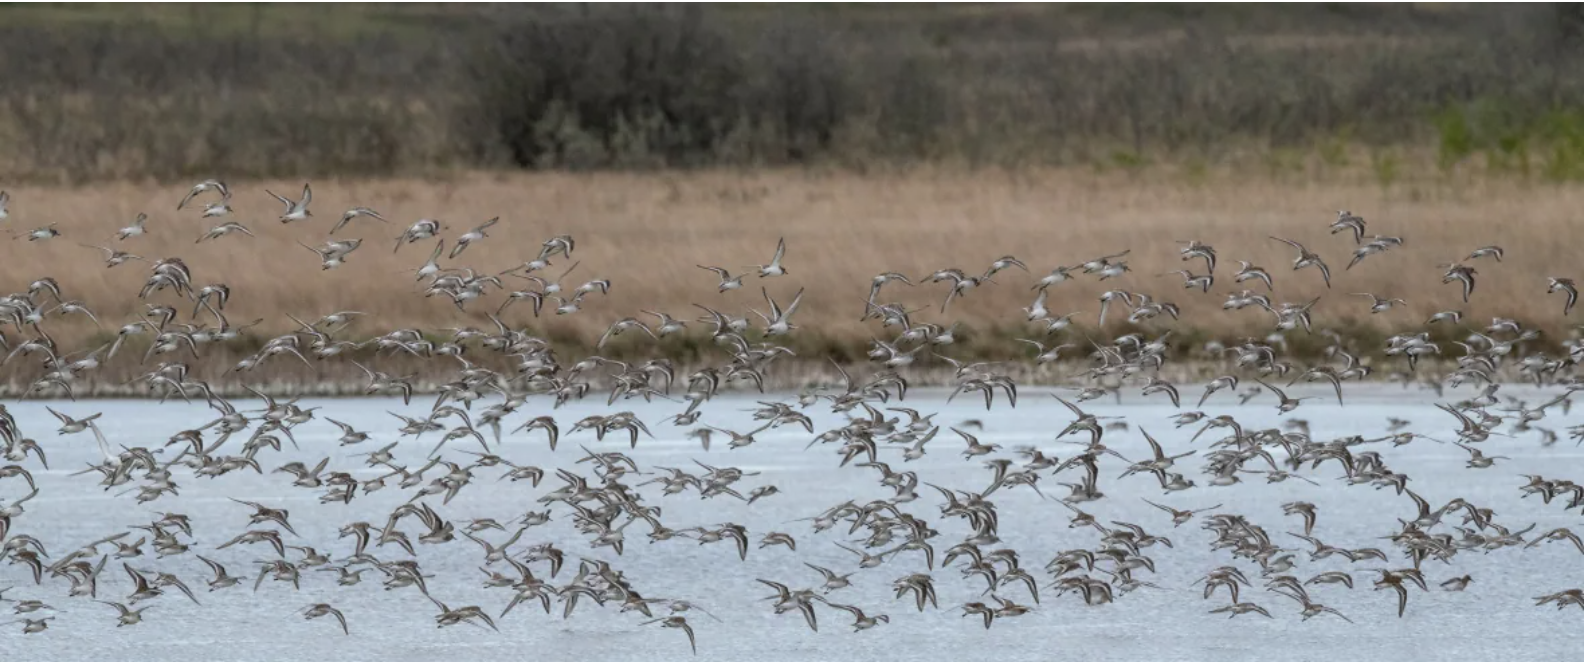 (Jason Bantle/Nature Conservancy of Canada) Sanderlings flying over Chaplin Lake and the surrounding grasslands. Monitoring surveys suggest that the abundance of Sanderlings migrating south through North America has dropped substantially in comparison to the early 1970s, according to the Government of Canada. (Jason Bantle/Nature Conservancy of Canada)